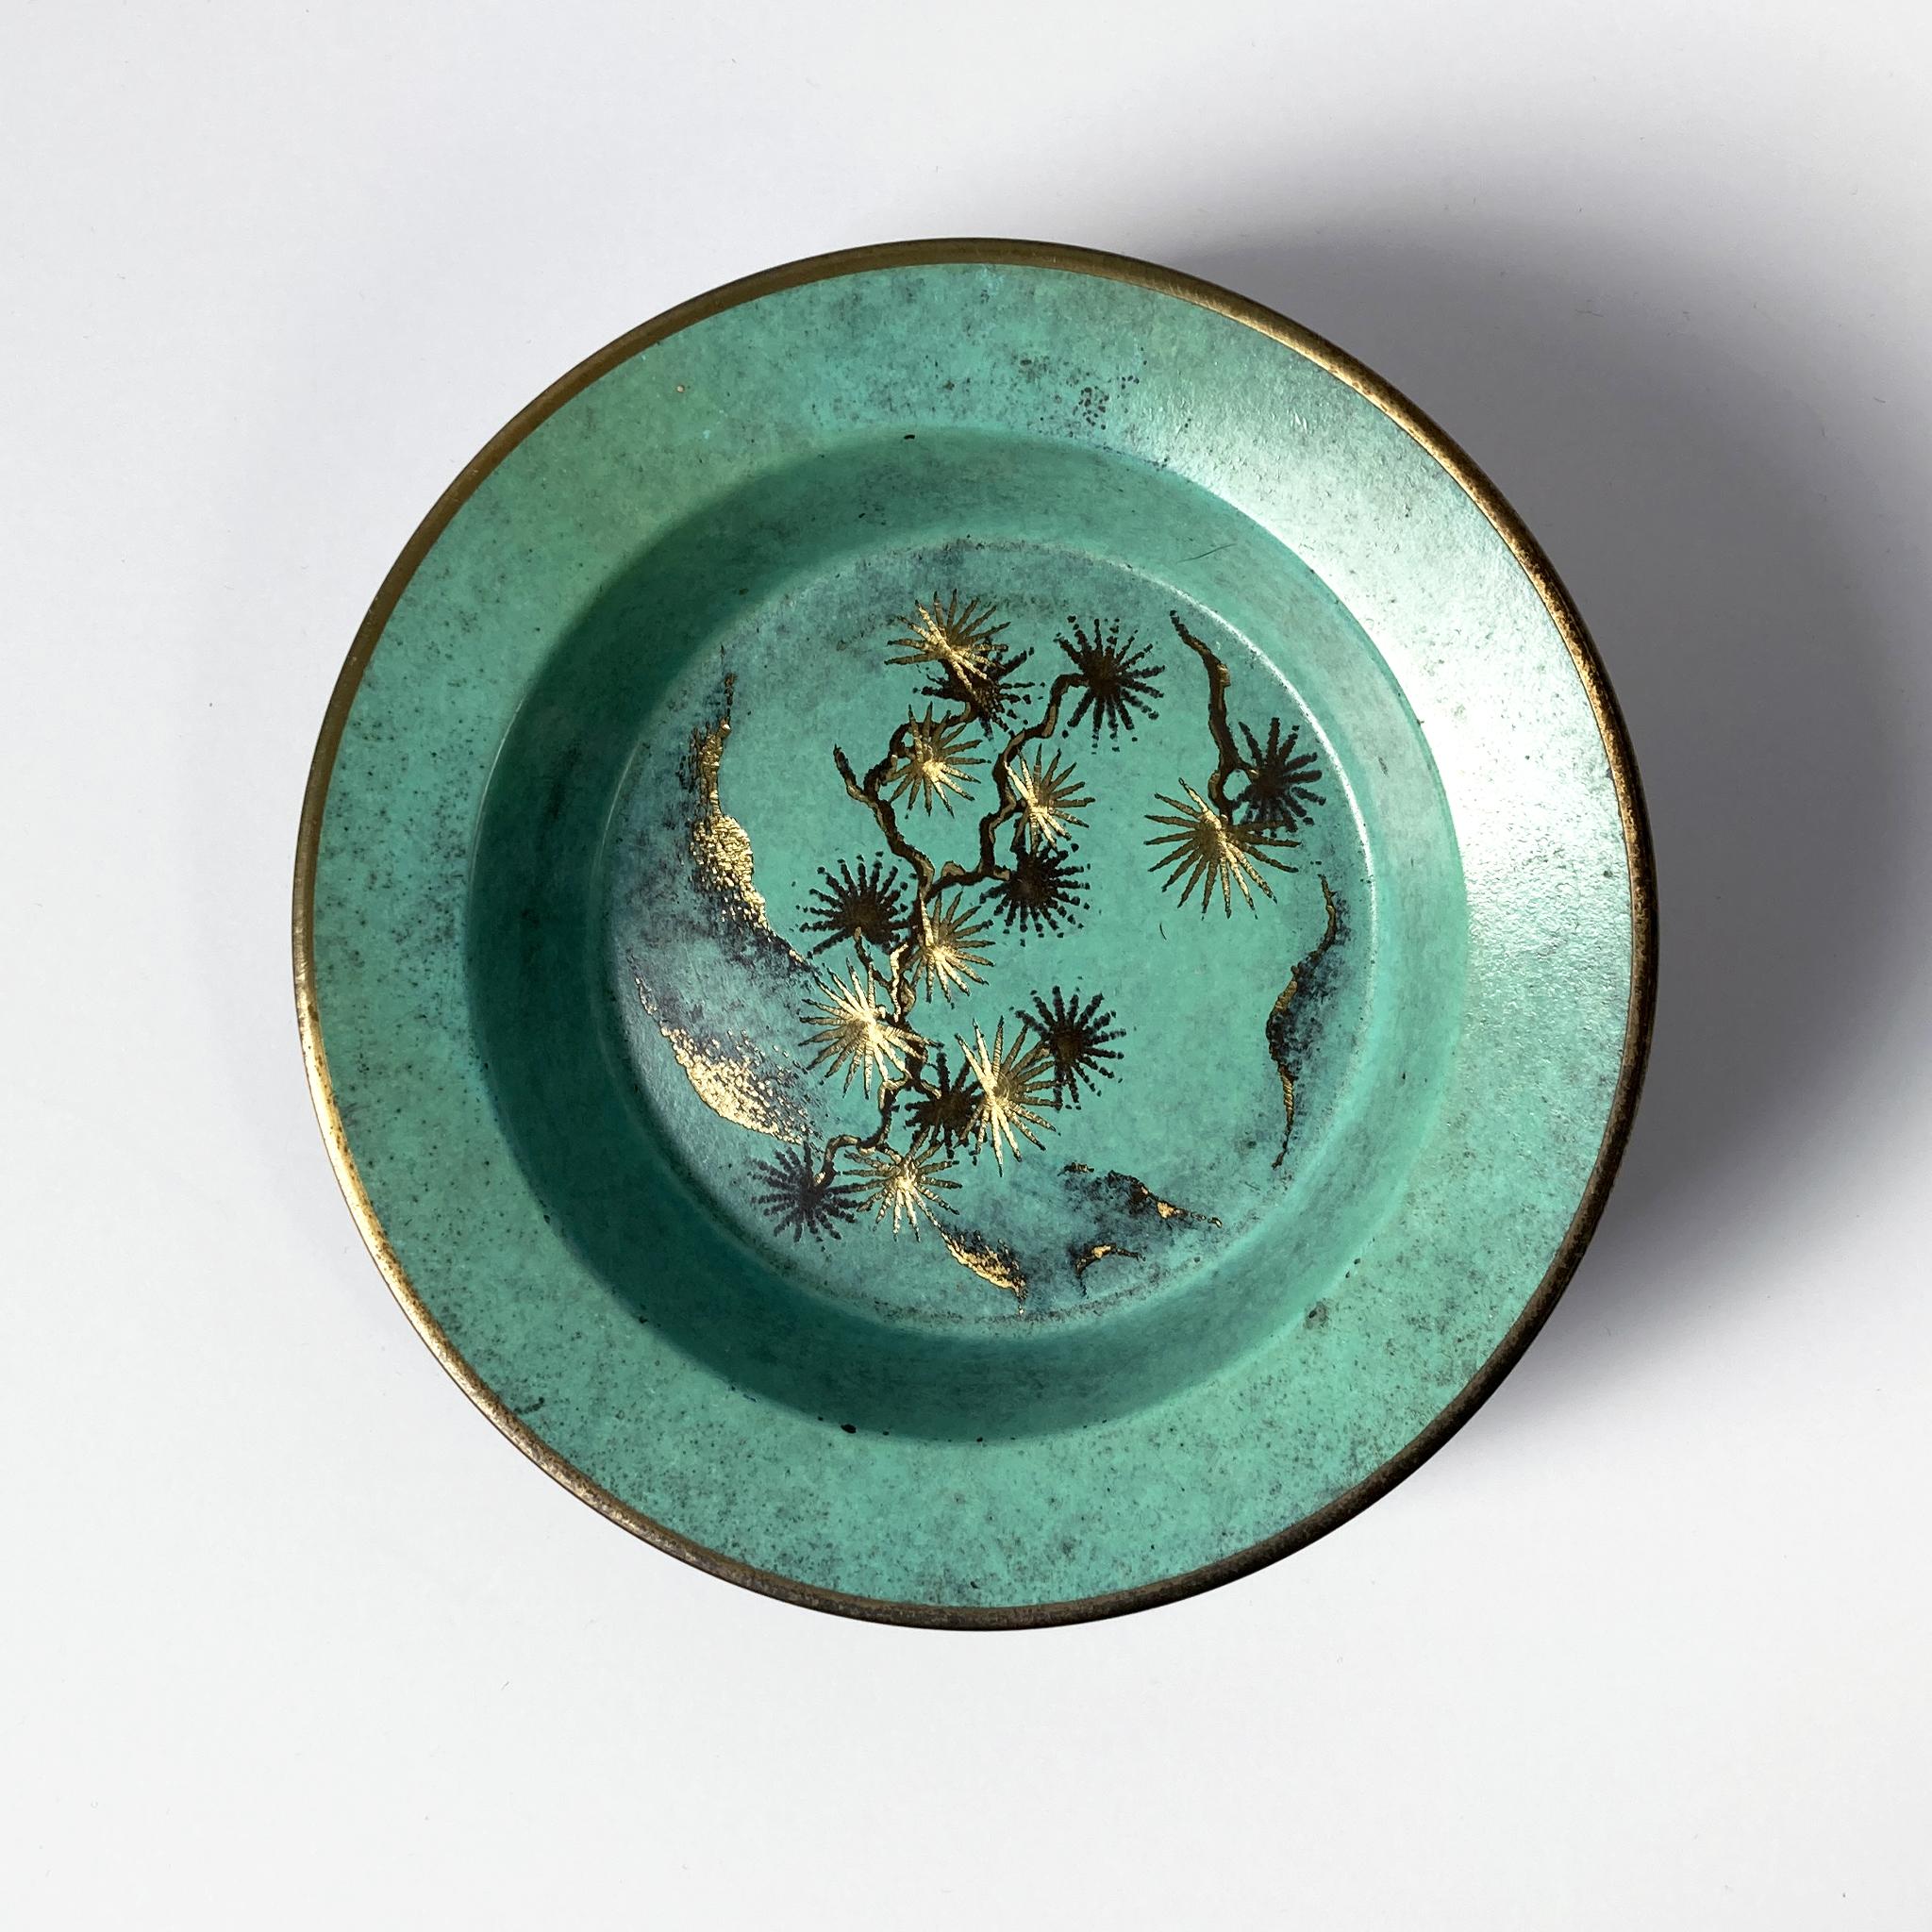 Rare Paul Haustein, WMF Ikora metal vide poche with glass insert. The patinated green metal contrasts beautifully with the etched gold and dark brown pattern seen on the dish. The glass insert has beautifully bevelled edges and fits the metal dish